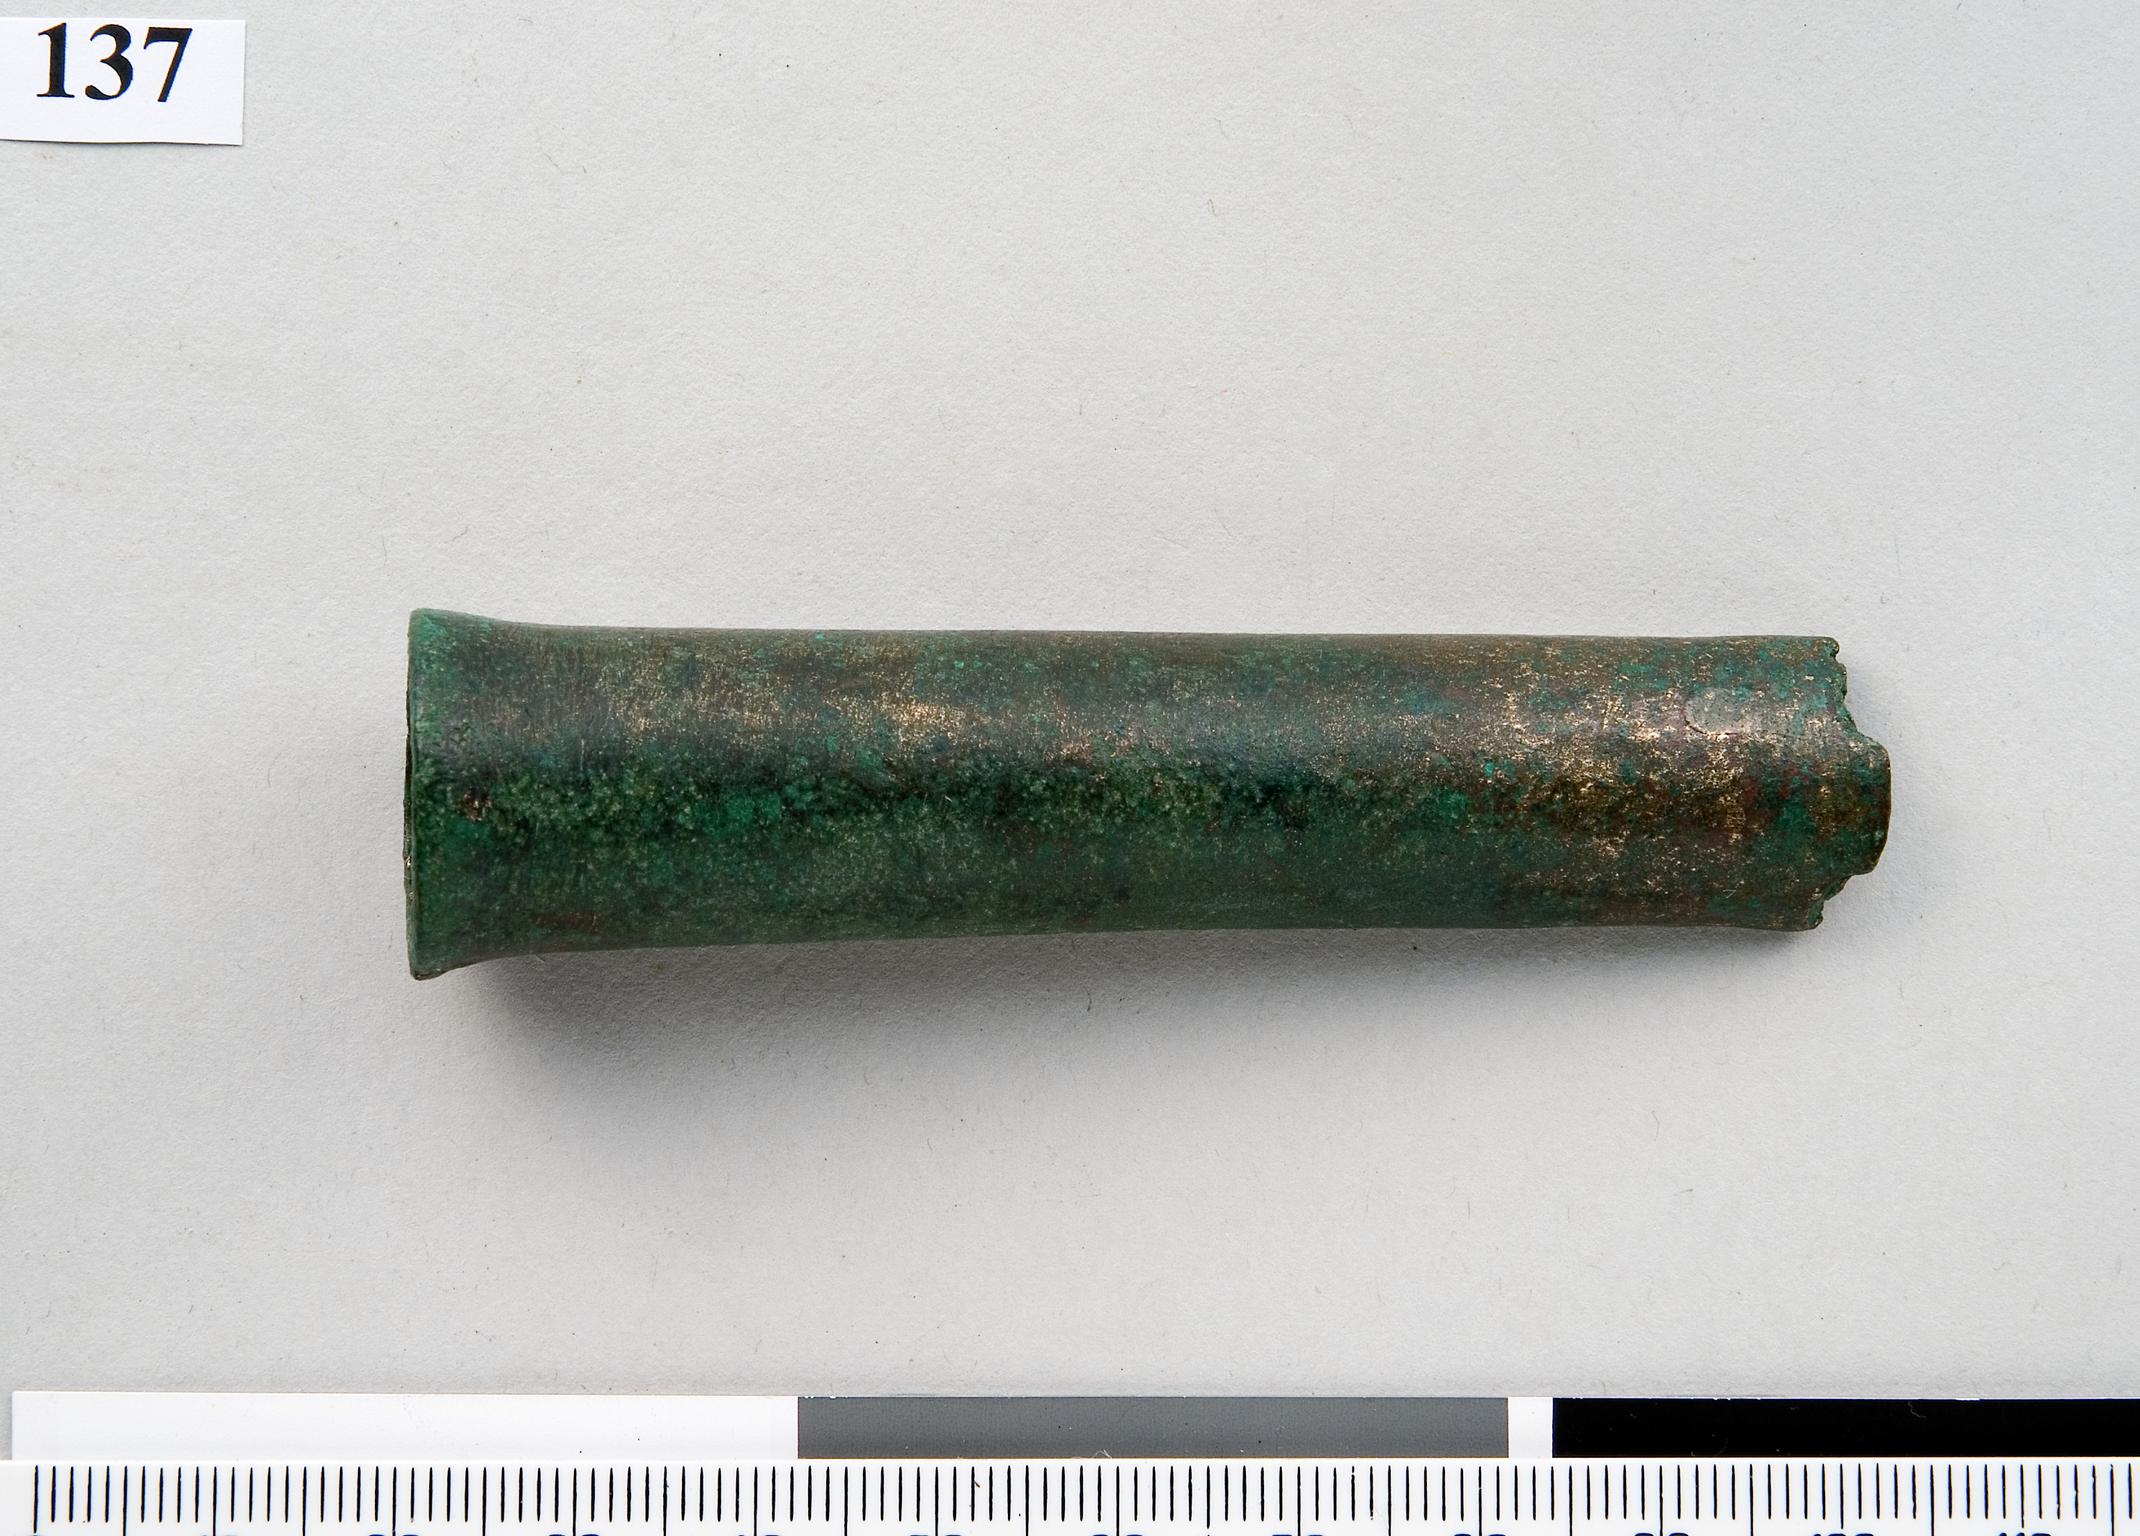 Late Bronze Age bronze socketed gouge